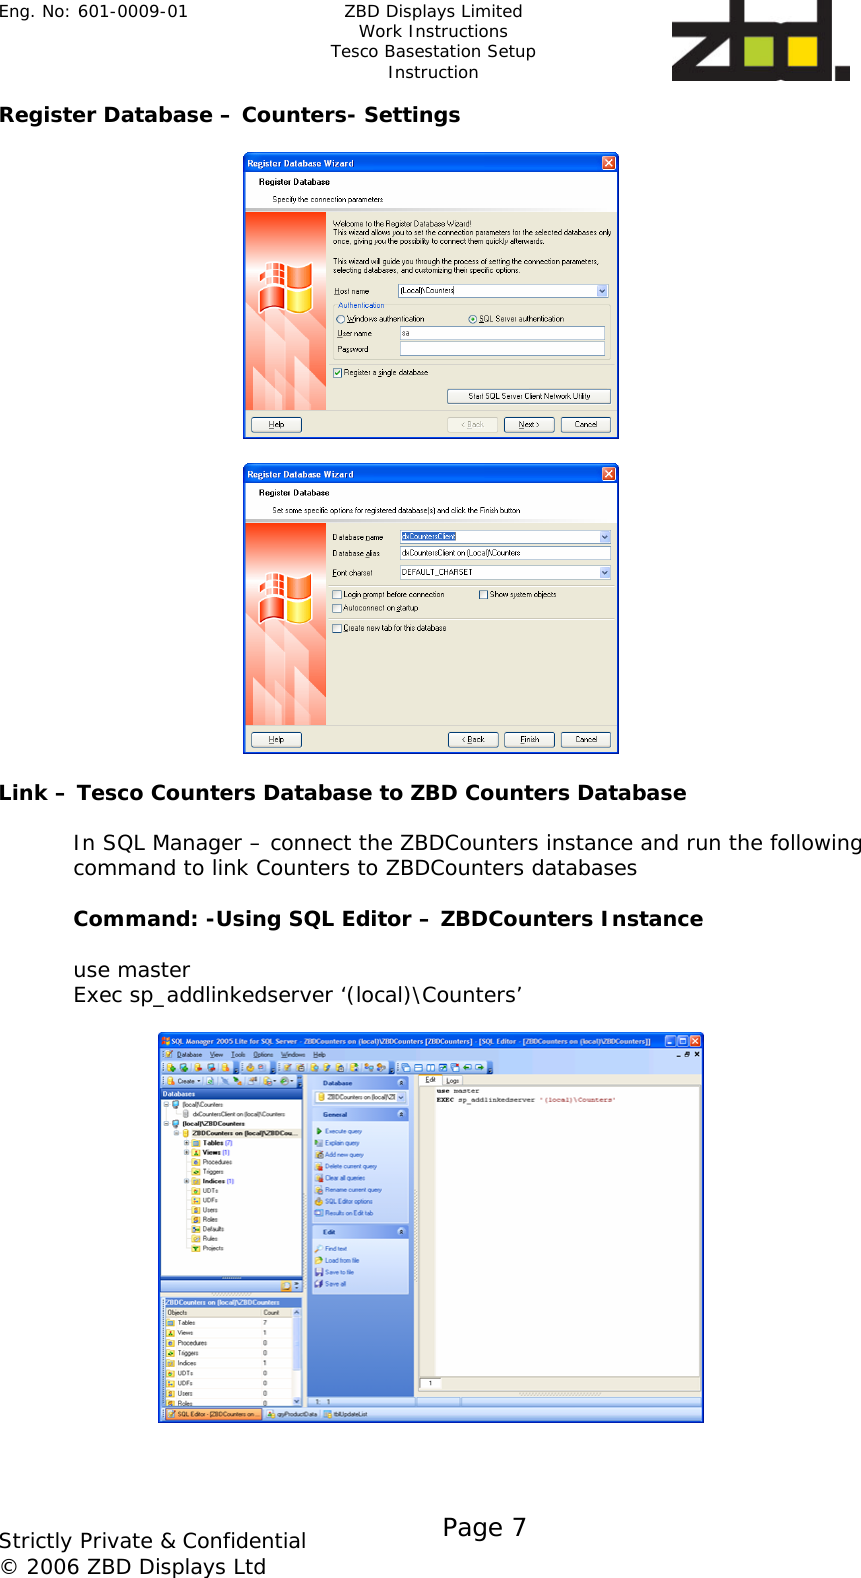 Eng. No: 601-0009-01   ZBD Displays Limited Work Instructions Tesco Basestation Setup Instruction    Strictly Private &amp; Confidential © 2006 ZBD Displays Ltd Page 7    Register Database – Counters- Settings      Link – Tesco Counters Database to ZBD Counters Database  In SQL Manager – connect the ZBDCounters instance and run the following command to link Counters to ZBDCounters databases  Command: -Using SQL Editor – ZBDCounters Instance  use master Exec sp_addlinkedserver ‘(local)\Counters’      